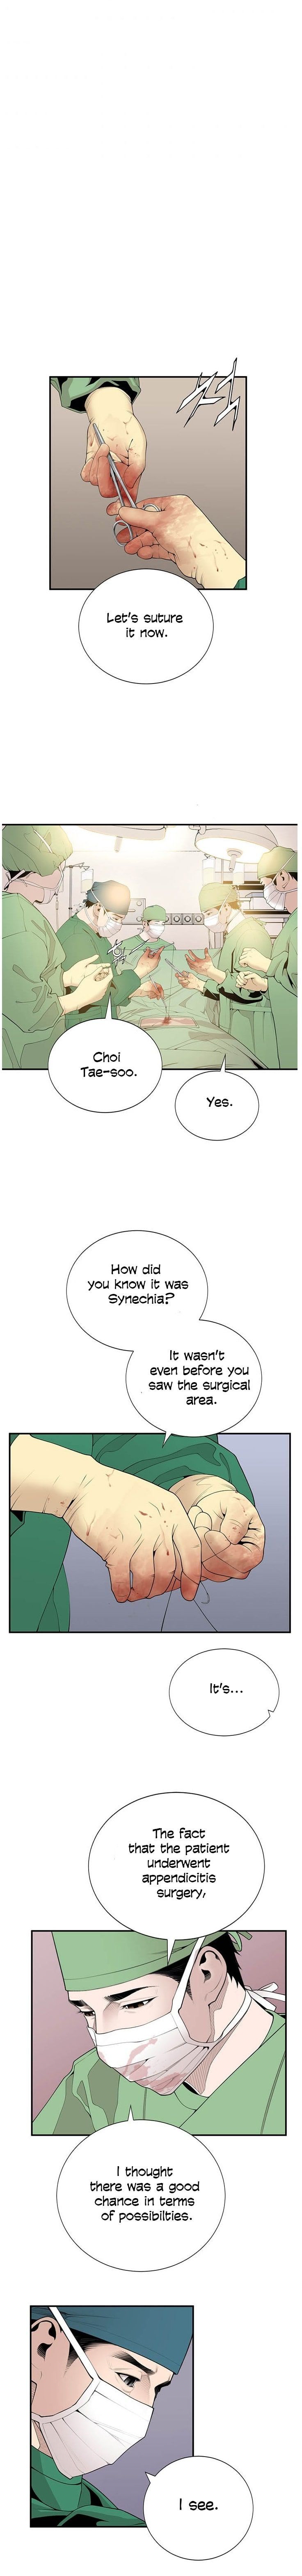 Dr. Choi Tae-Soo Chapter 15 page 4